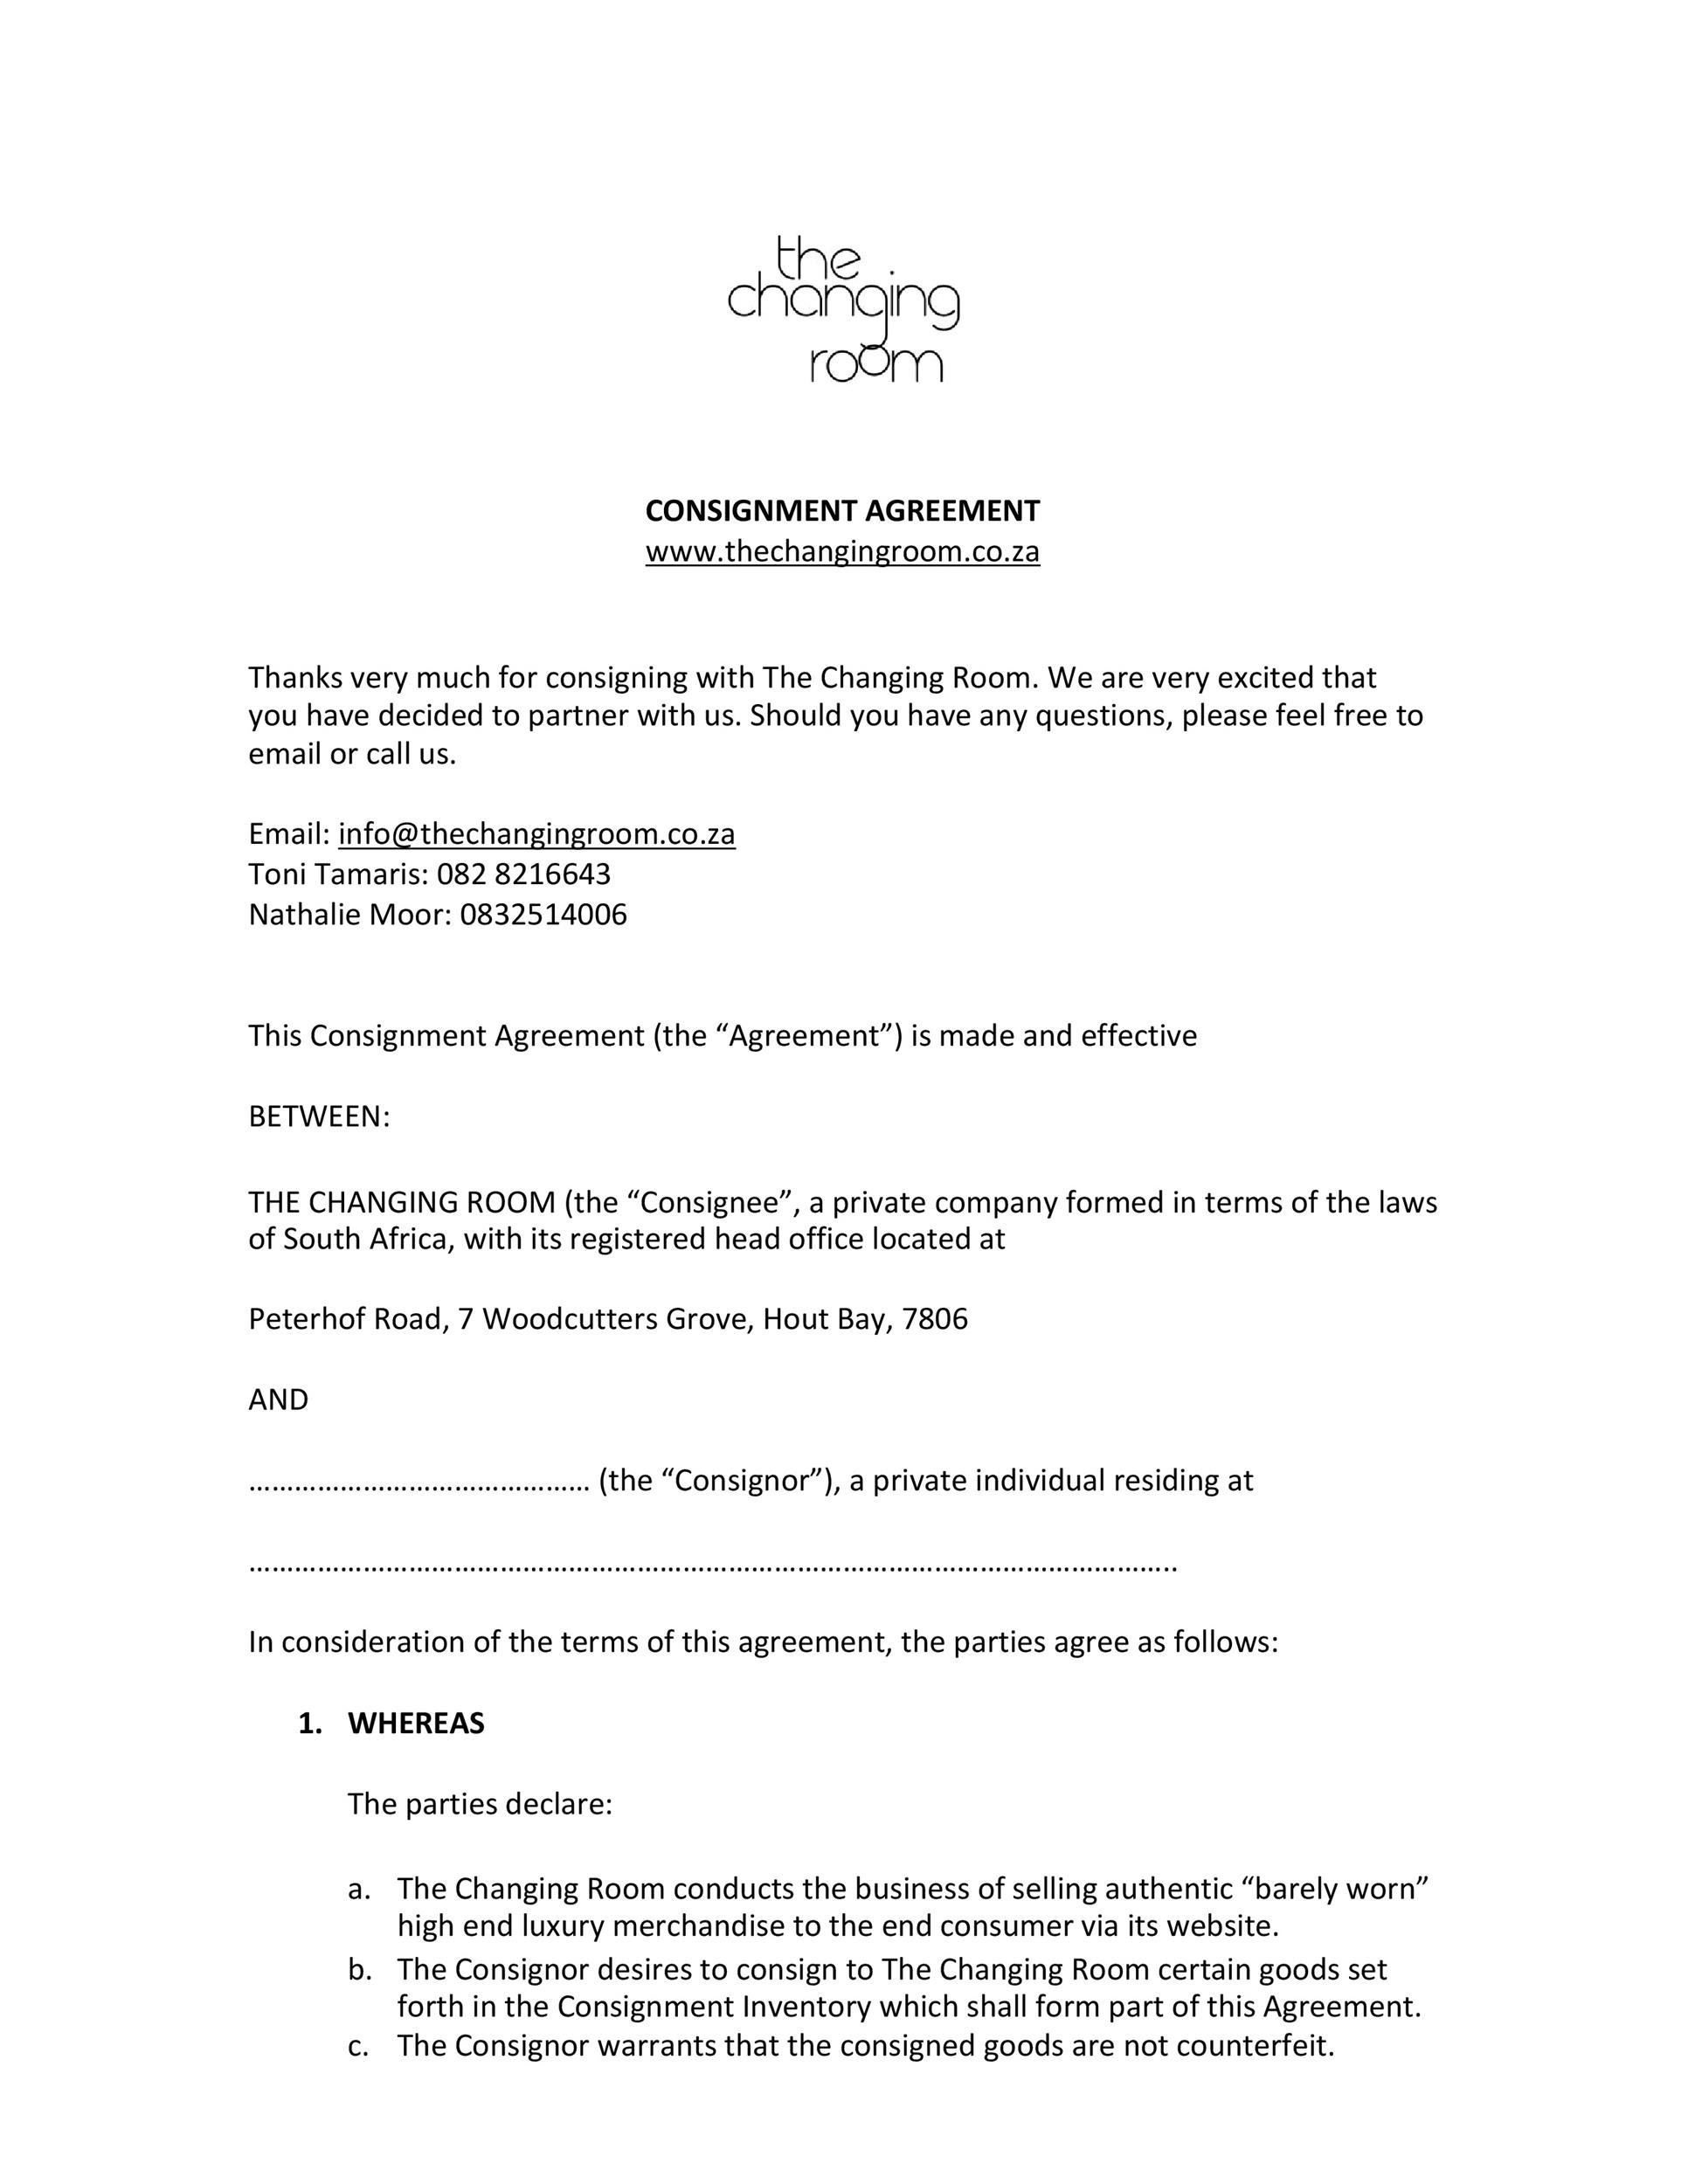 Free Consignment Agreement Template 17